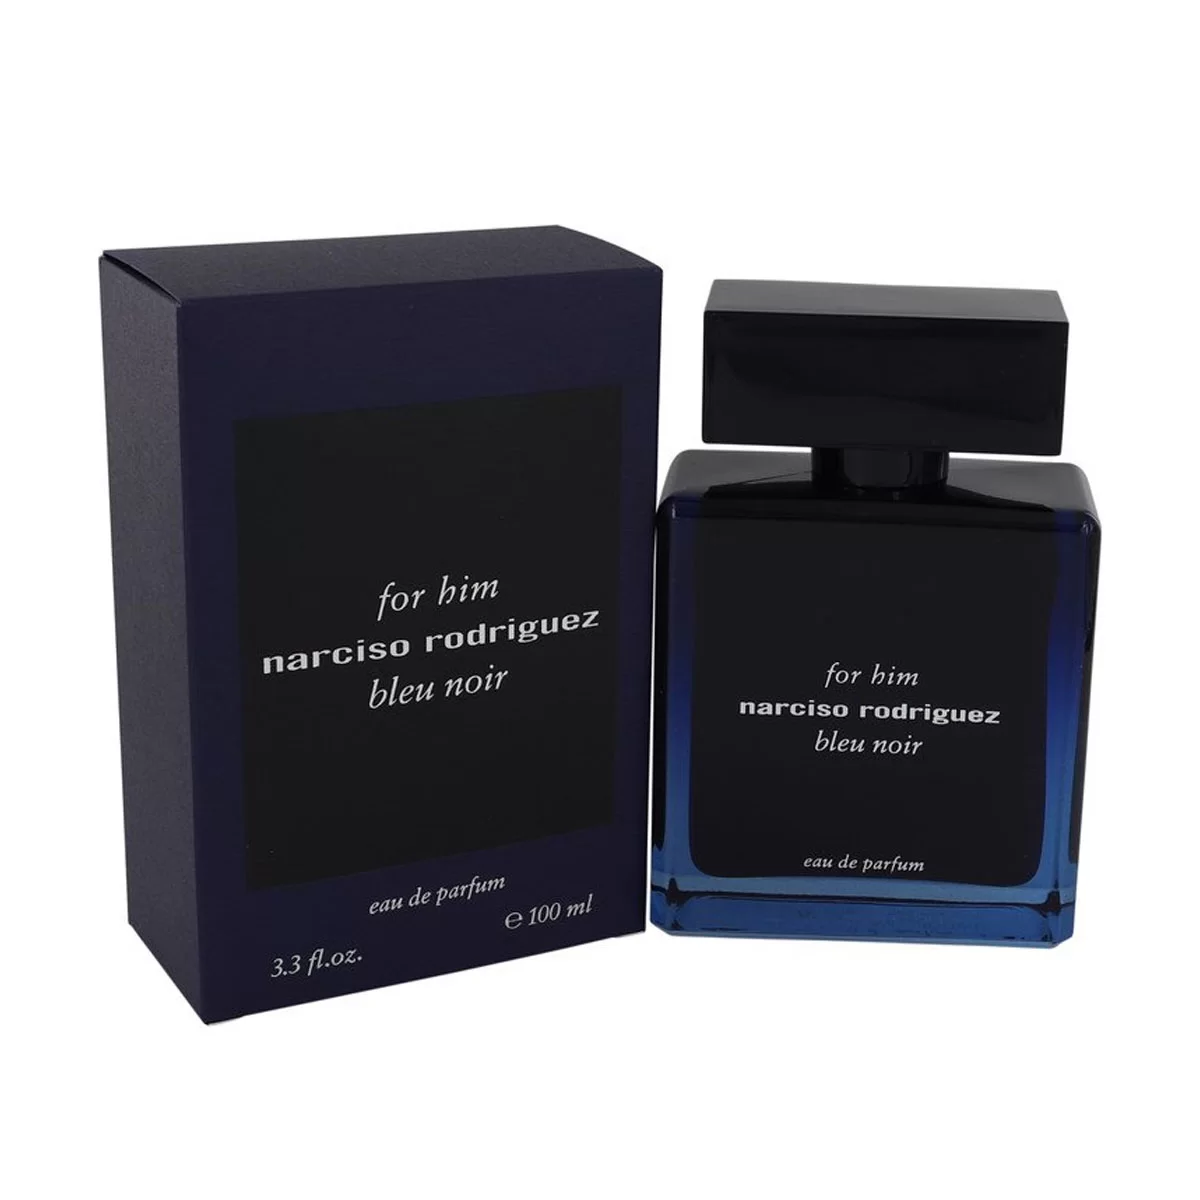 Narciso rodriguez for him bleu. Духи Narciso Rodriguez bleu Noir dor him. Narciso Rodriguez bleu Noir духи. Narciso Rodriguez bleu Noir extreme 100 мл духи мужские. Narciso Rodriguez for him bleu Noir.